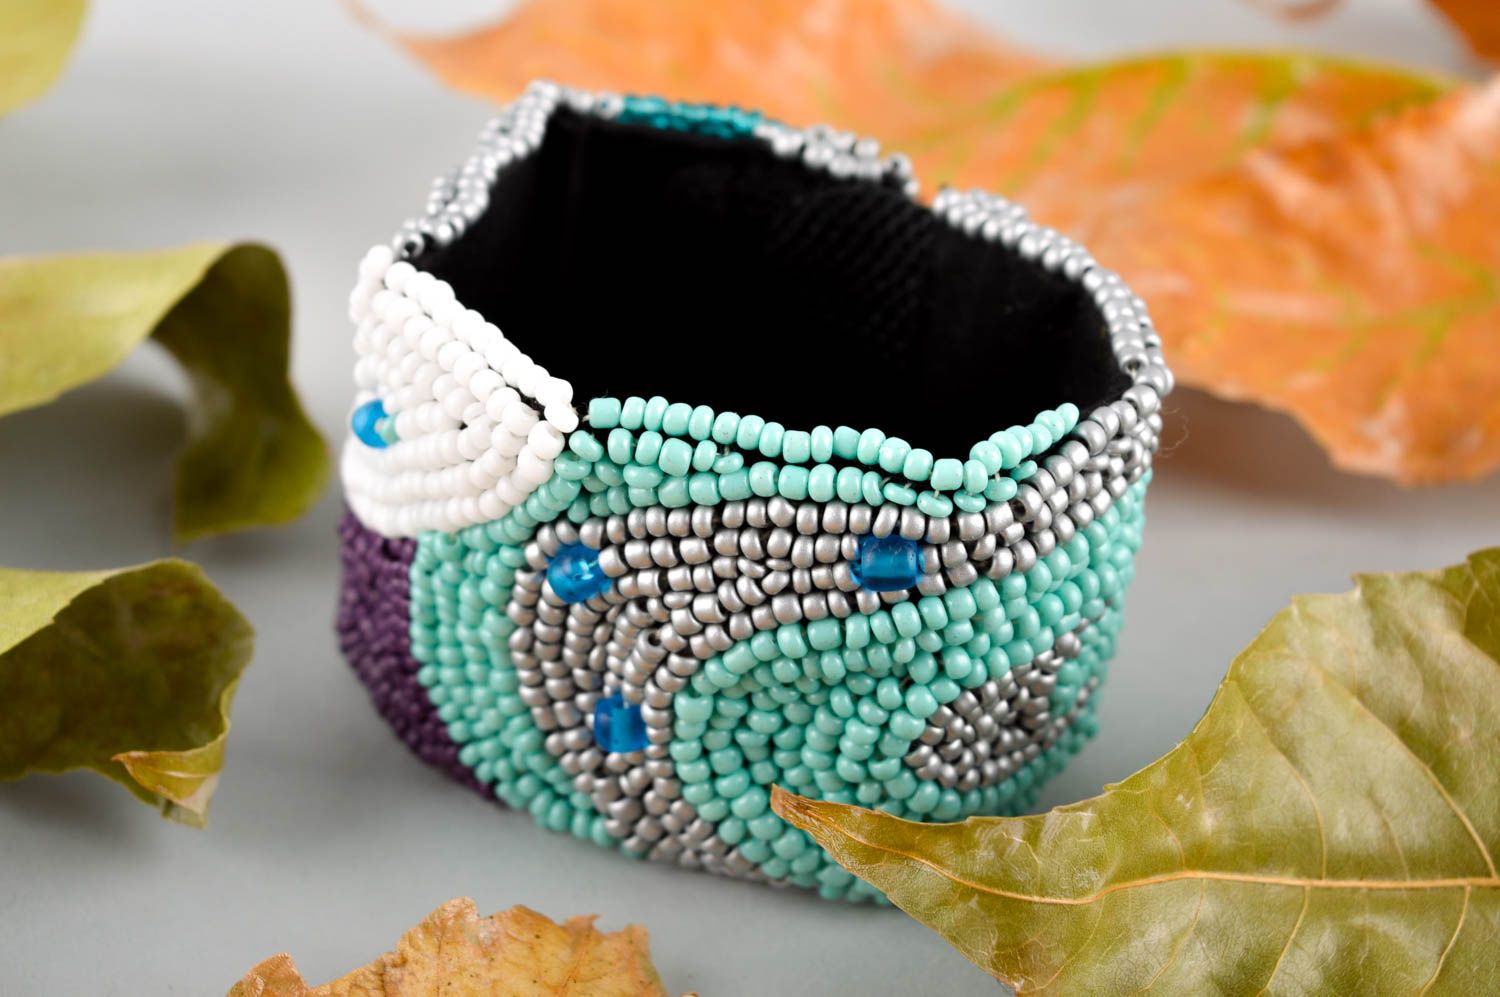 Stylish handmade beaded wide wrist bracelet in turquoise, white and black colors photo 1